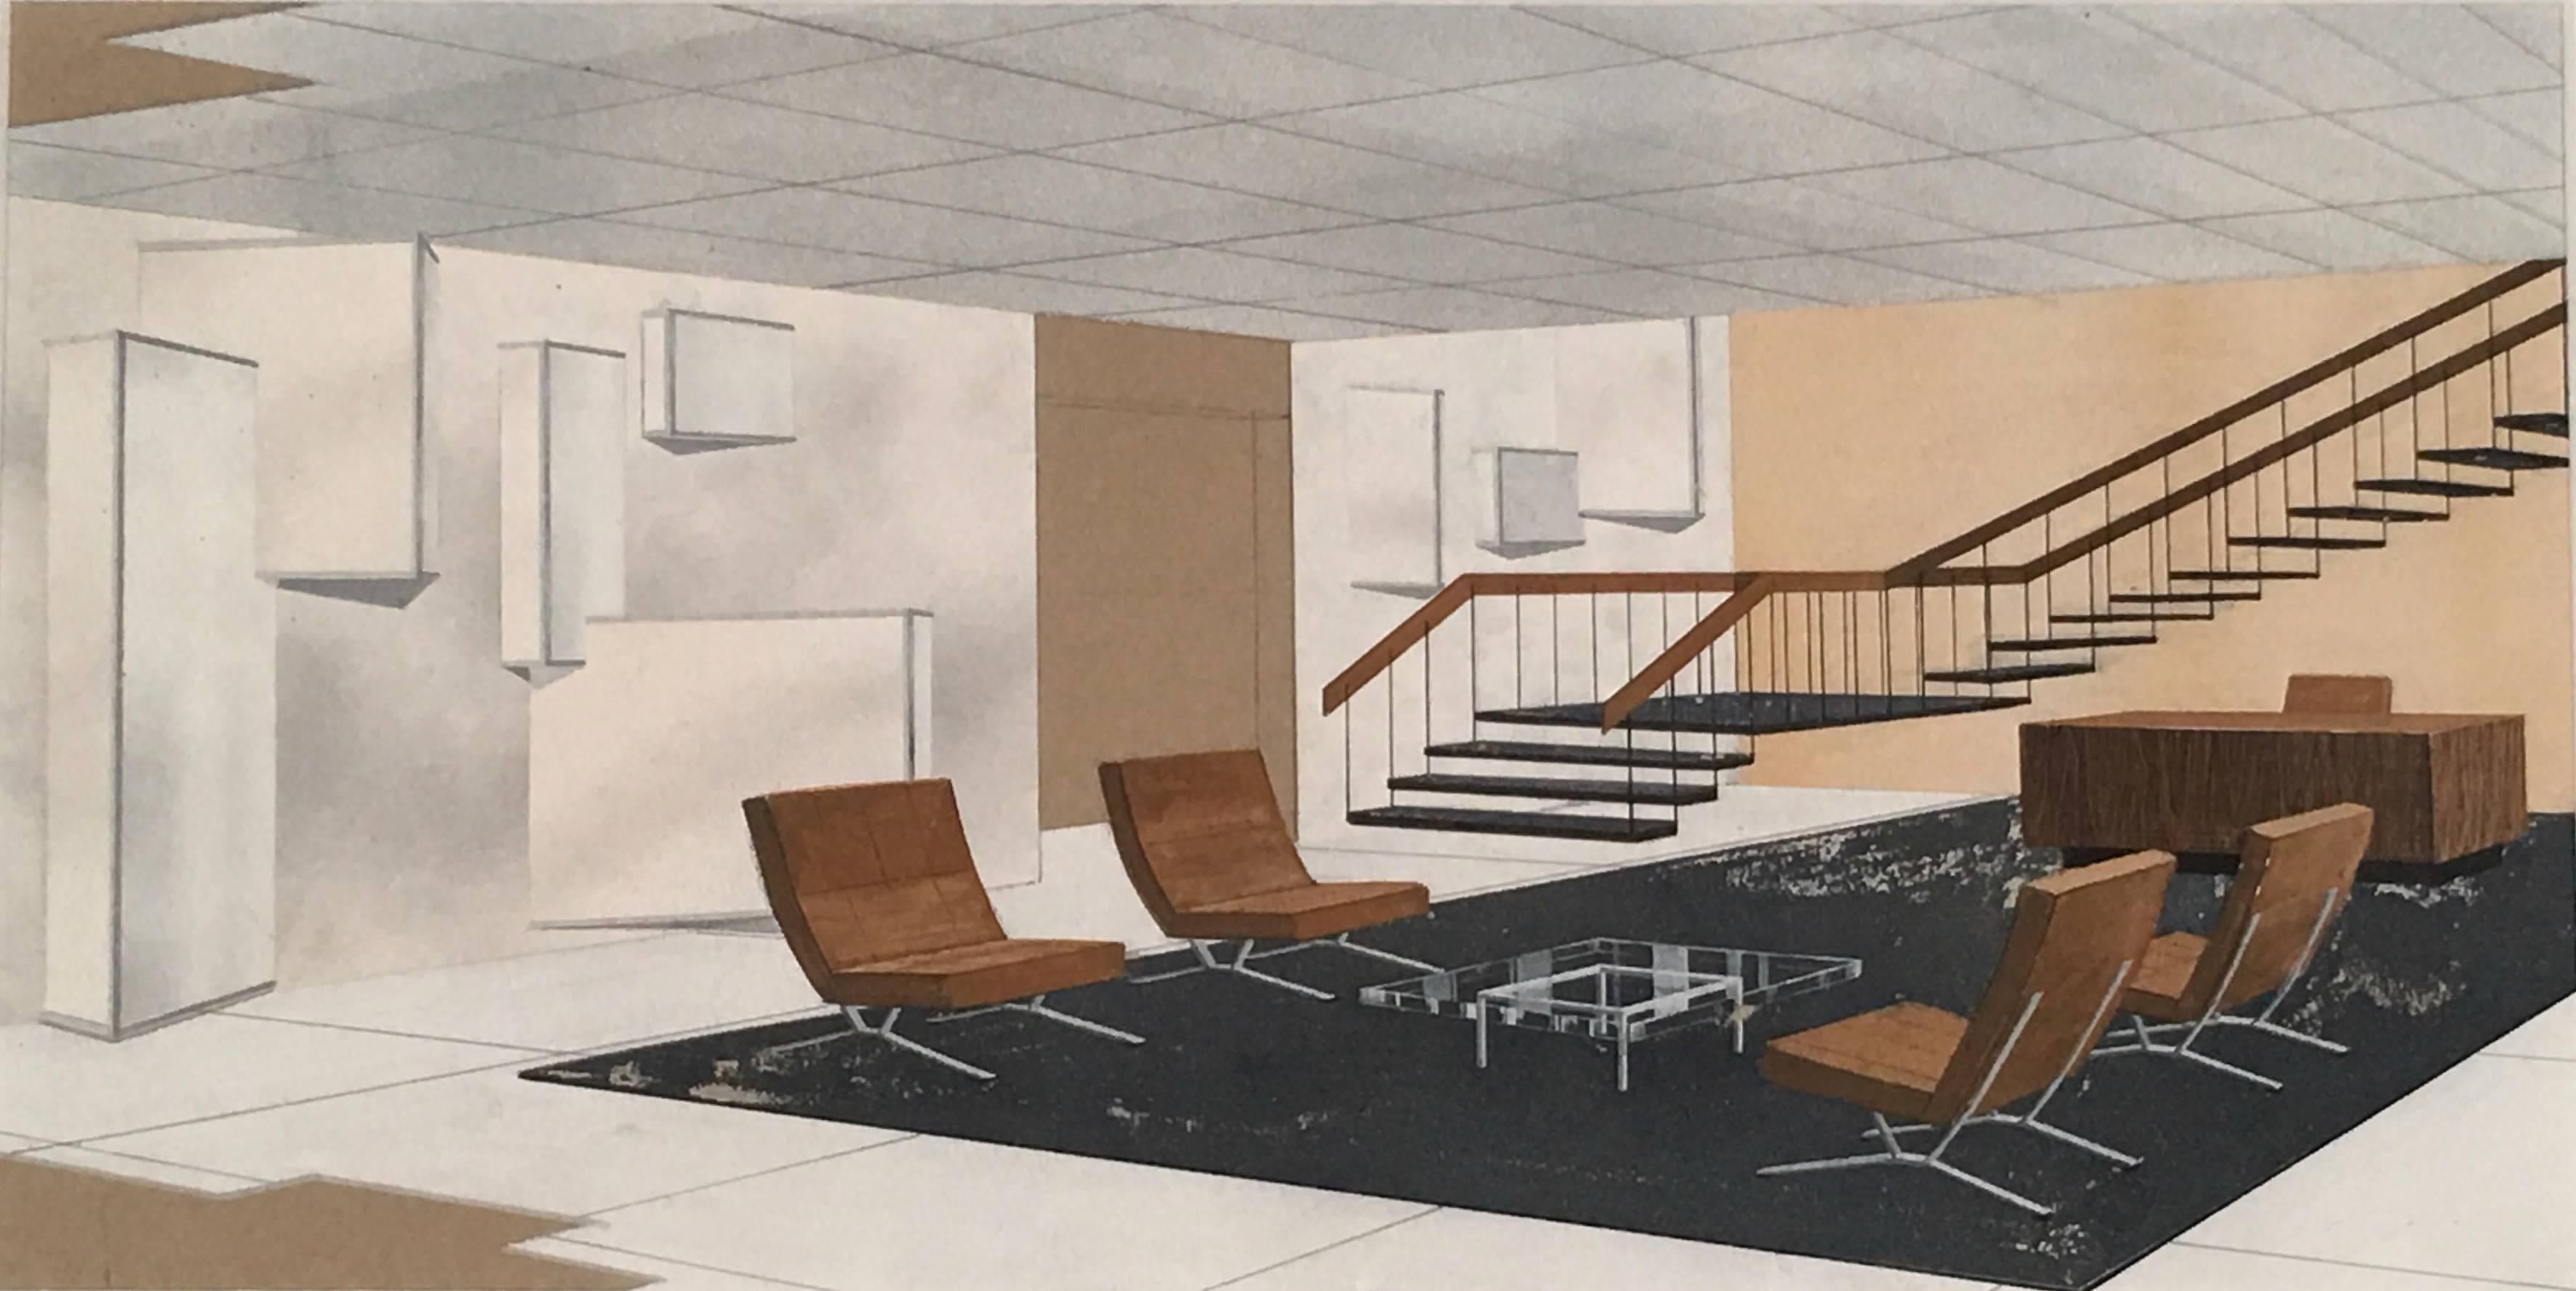 An original gouache drawing of a stylish modernist interior, circa 1930s, featuring a set of four Bauhaus style chairs with an elegant floating staircase behind and architectural lights or windows on the left side of the room. Archivally matted and